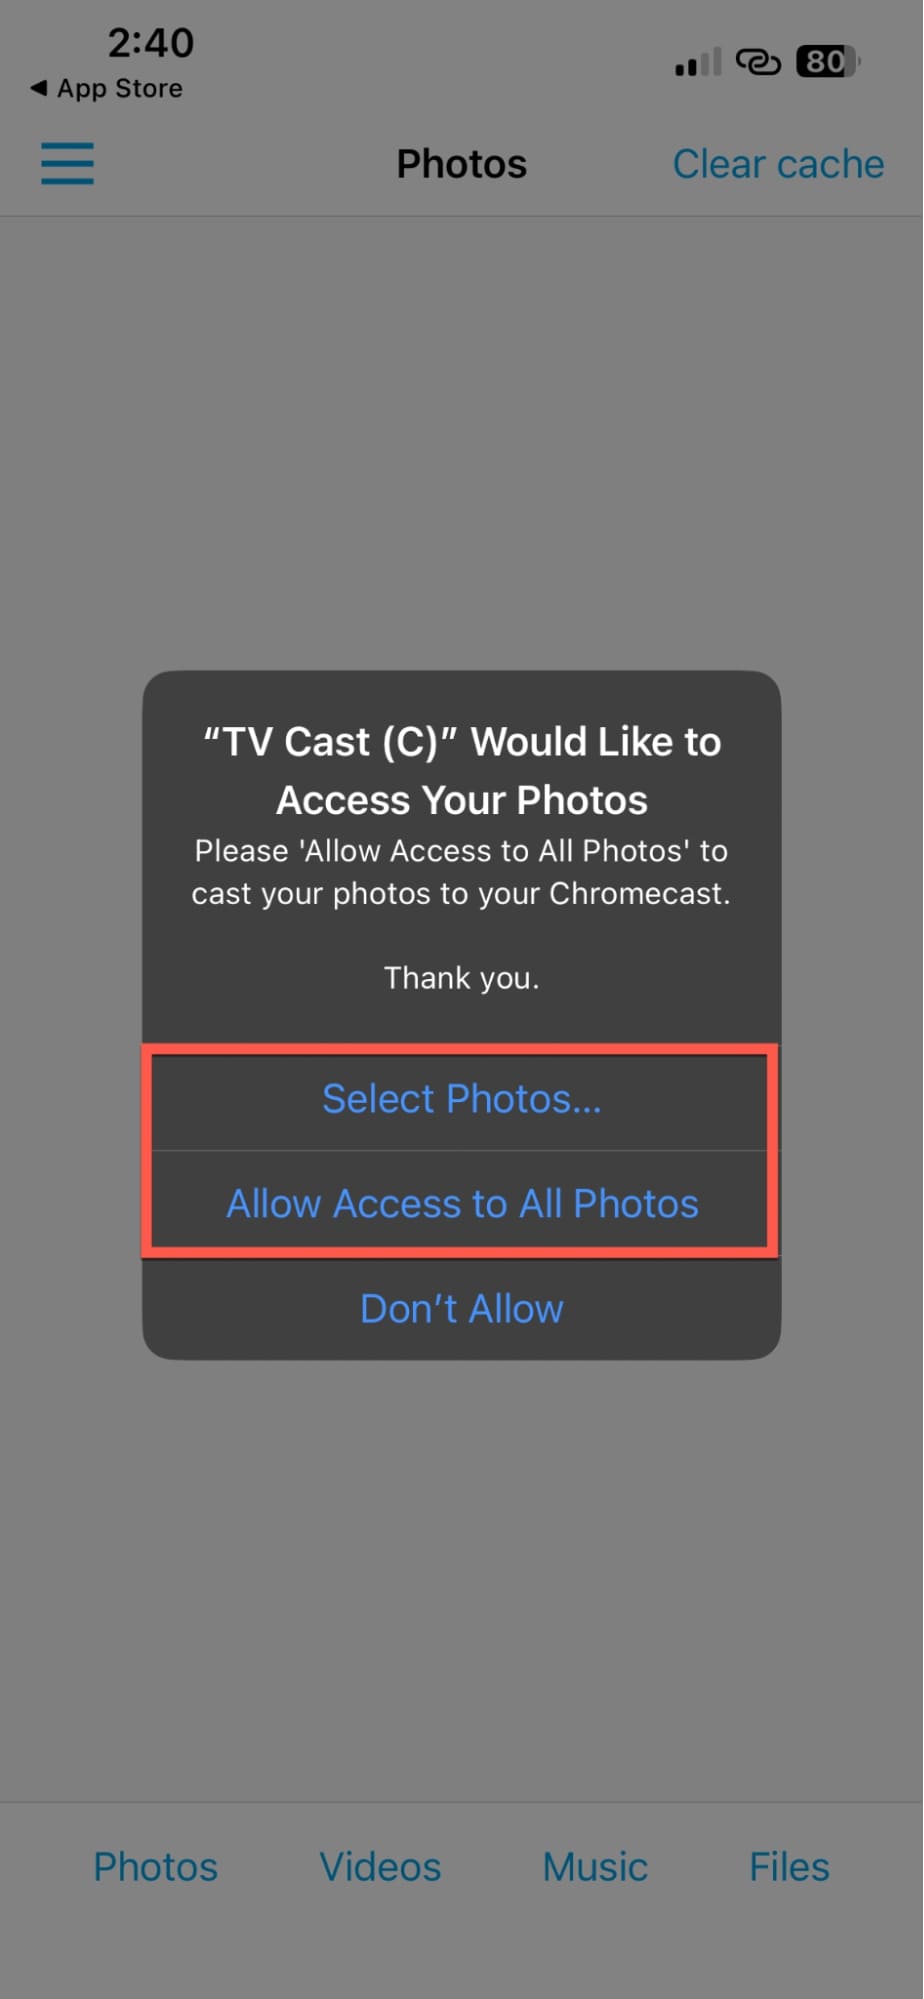 Give access to the photos to TV Cast Chromecast